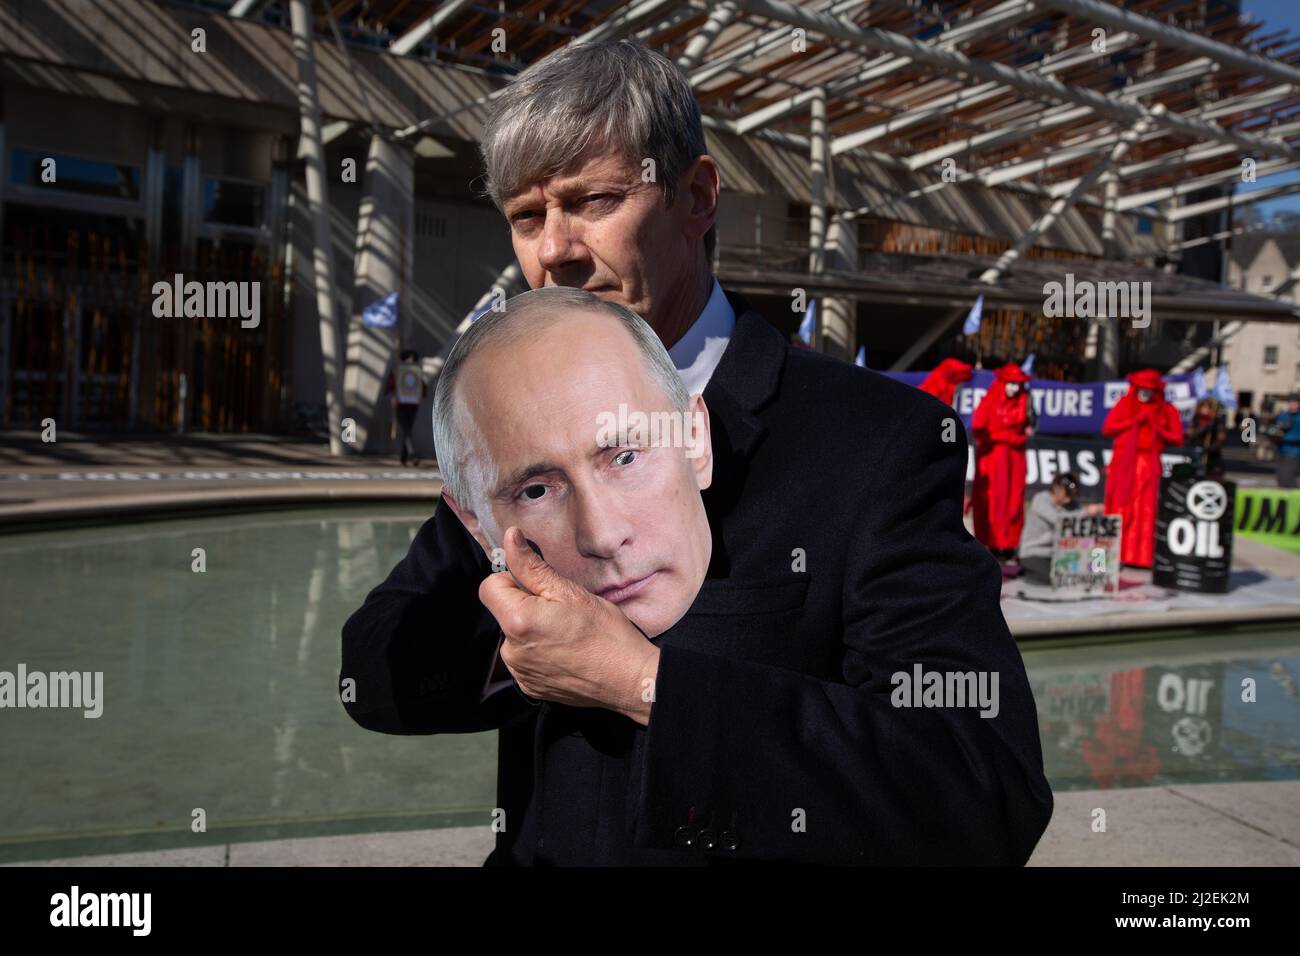 Edinburgh, Scotland, 1 April 2022.  Climate activists from Extinction Rebellion protest outside the Scottish Parliament on day of record energy price rises in UK.  Activists, one wearing a mask of Russian president Vladimir Putin, staged a mock oil spill outside the building to protest the continuing reliance on fossil fuels. Photo credit: Jeremy Sutton-Hibbert/Alamy Live News. Stock Photo